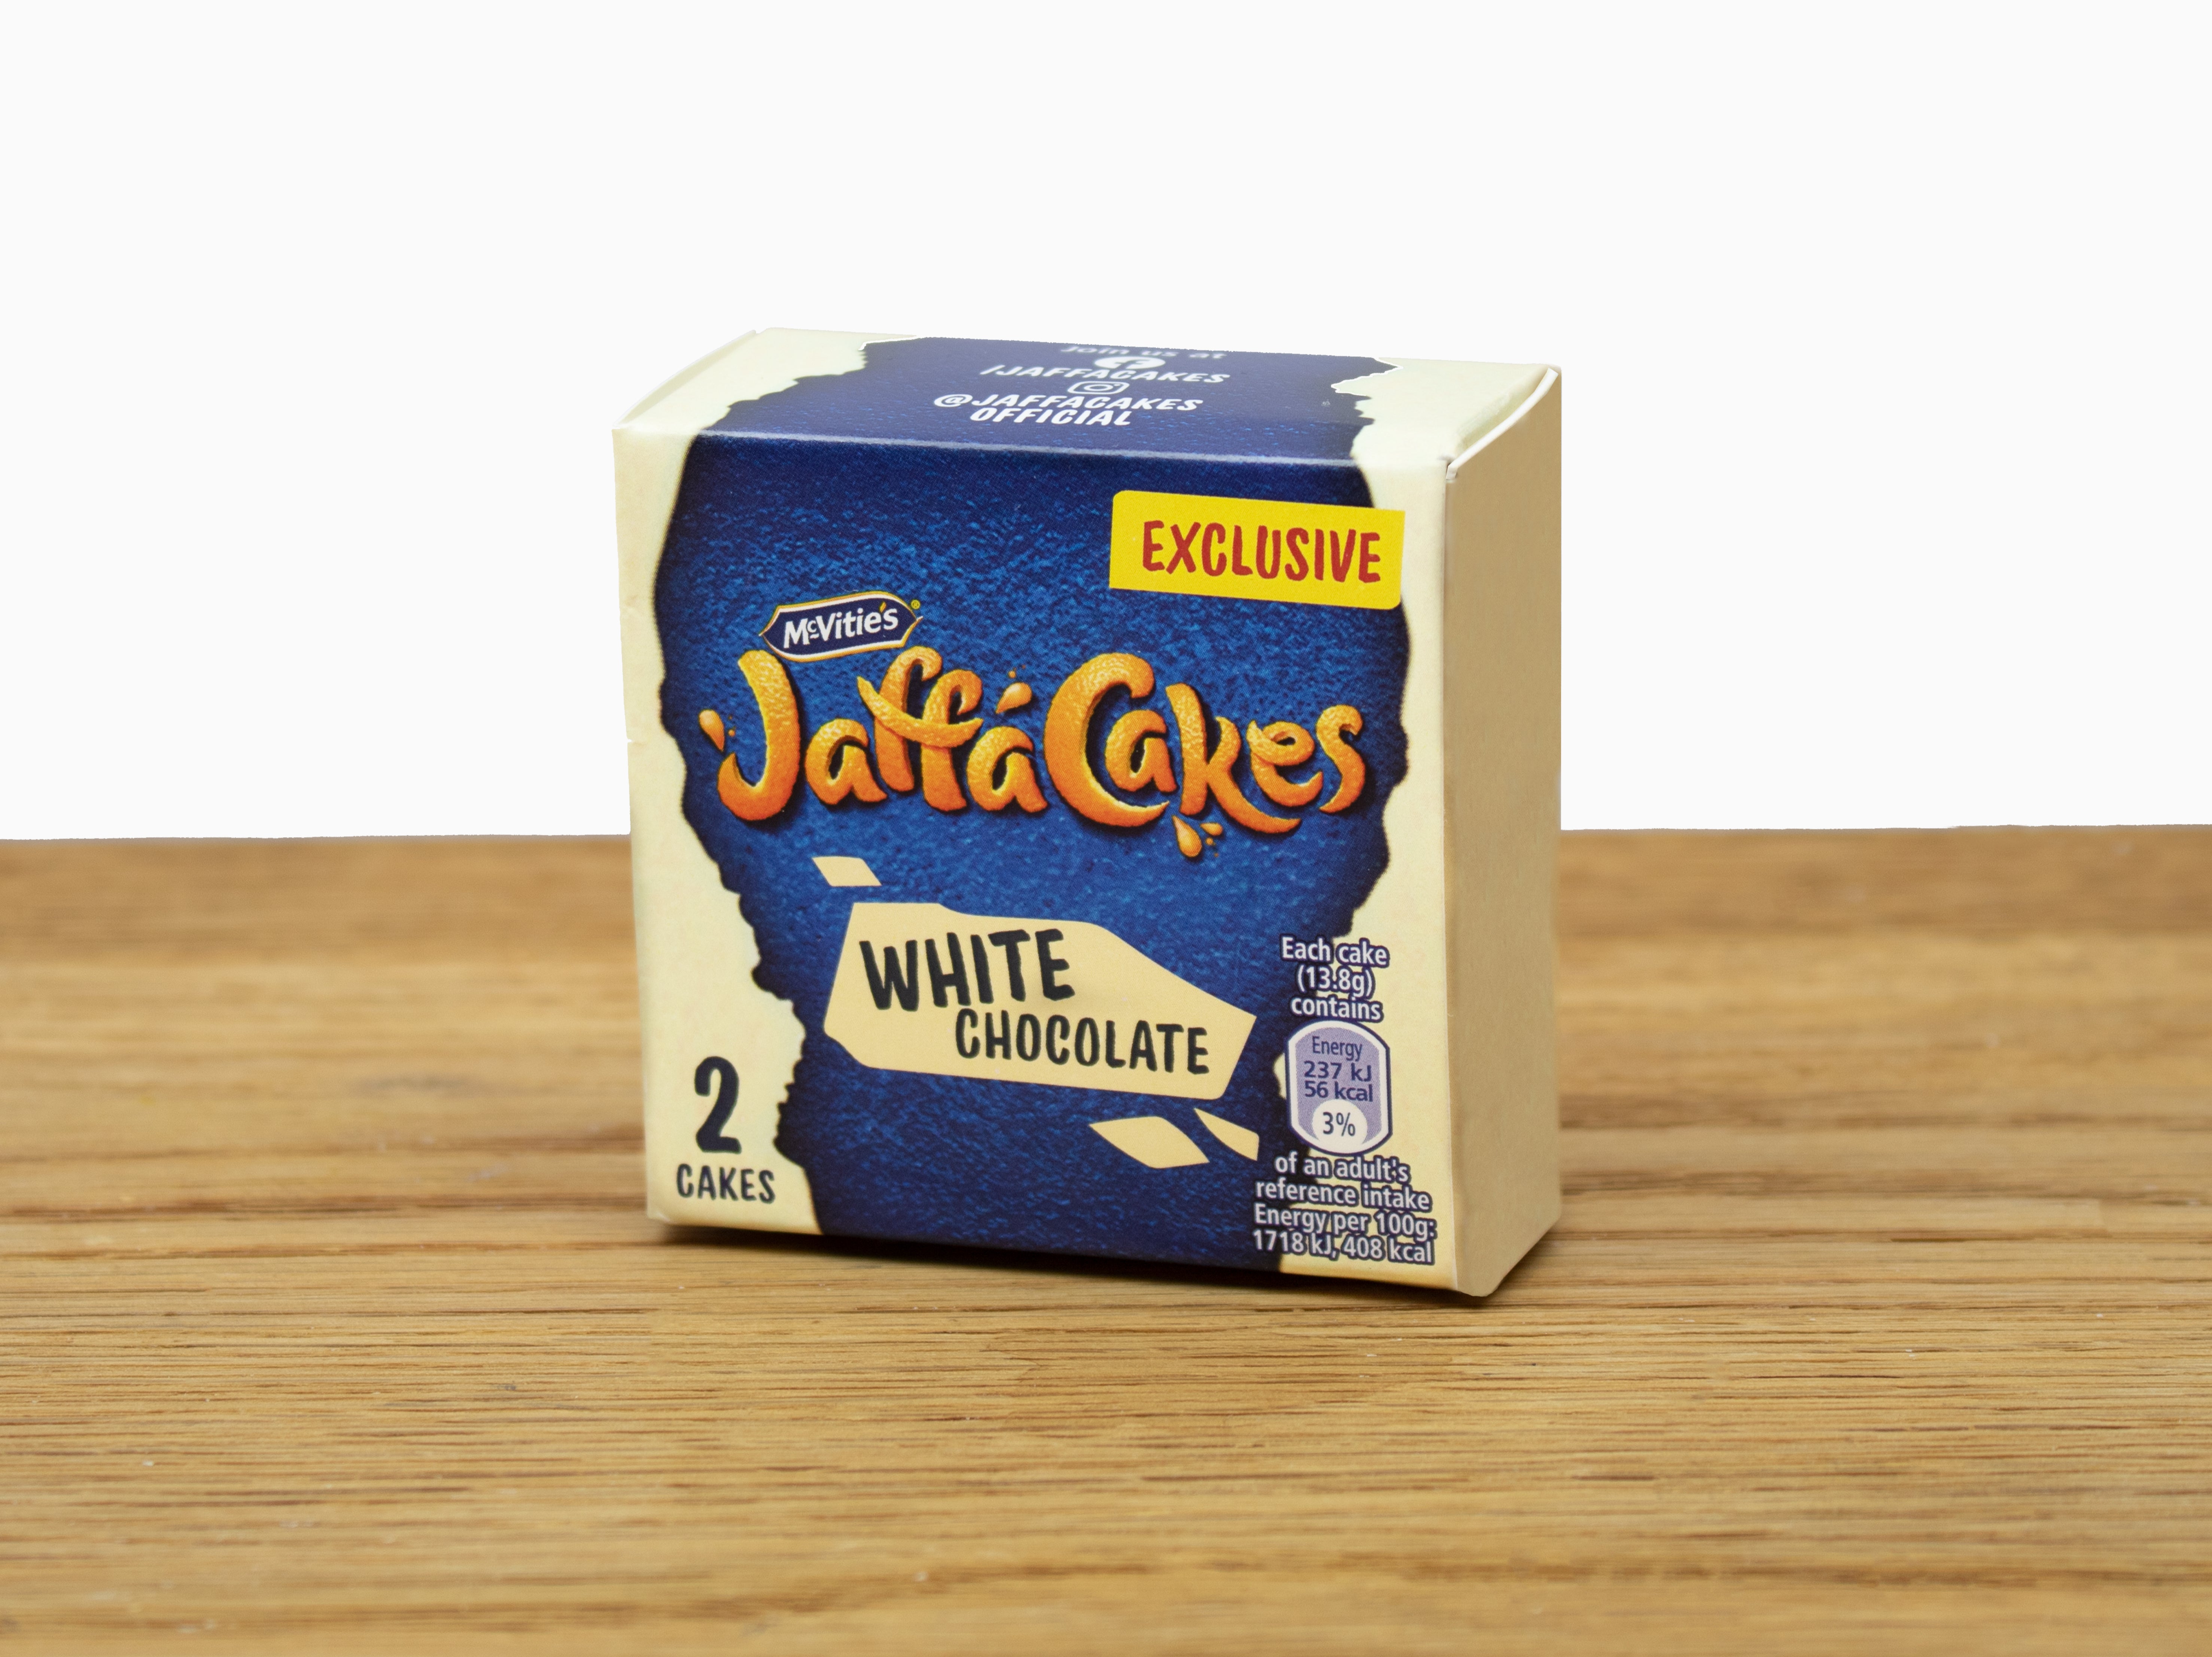 Each pack contains two Jaffa Cakes